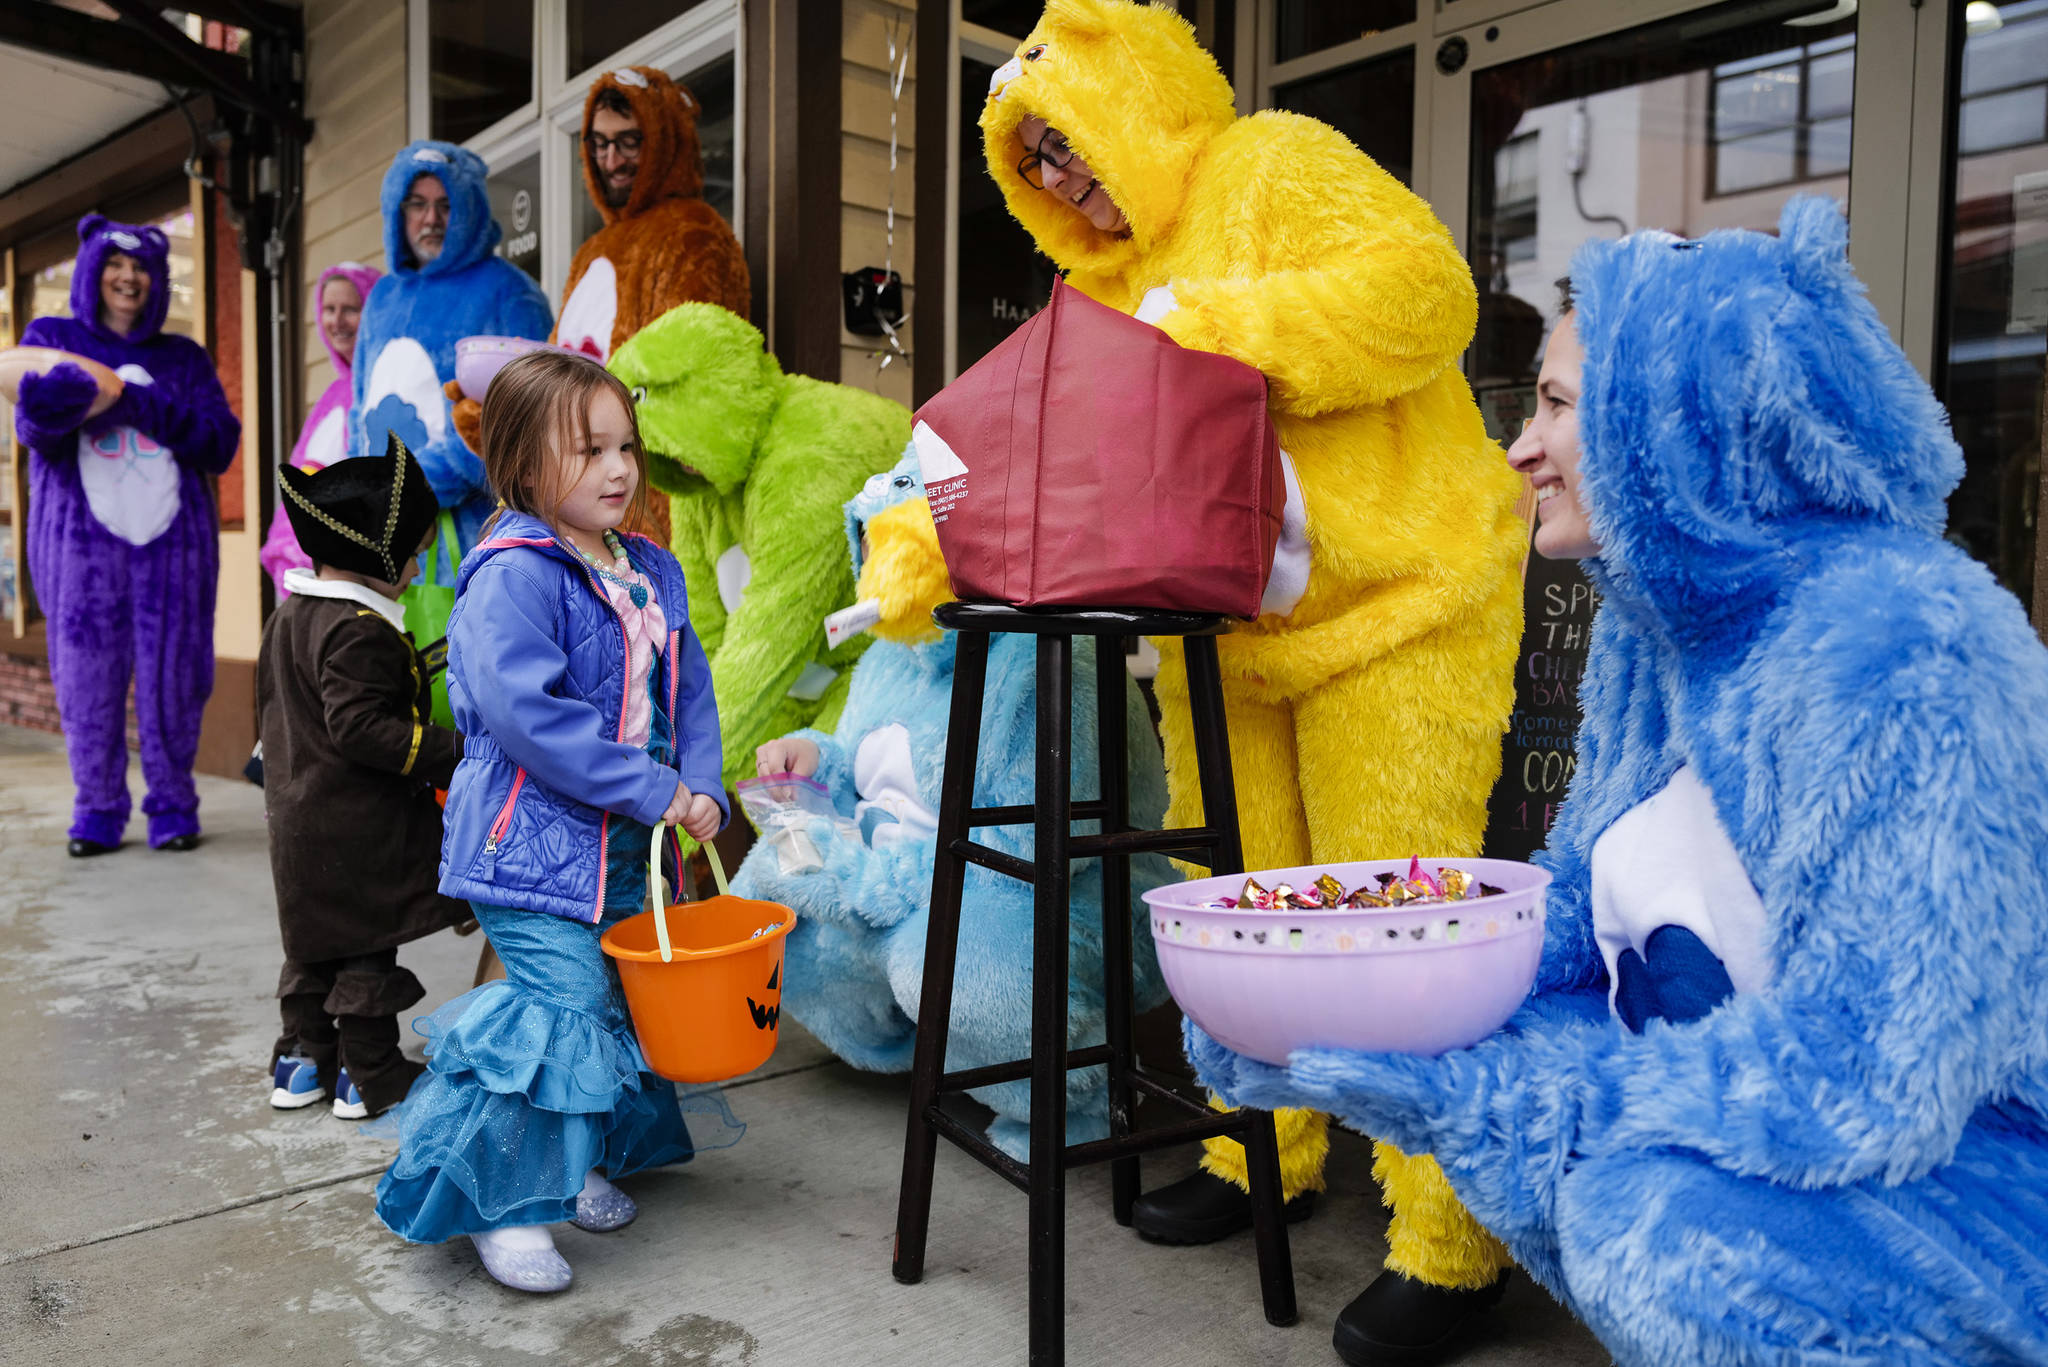 Members of Front Street Clinic greet Harlyn Noe, 3, during the Trick or Treat Downtown event on Thursday, Oct. 31, 2019. More than 70 business put out orange balloons to participate in the event aimed at young children. (Michael Penn | Juneau Empire)